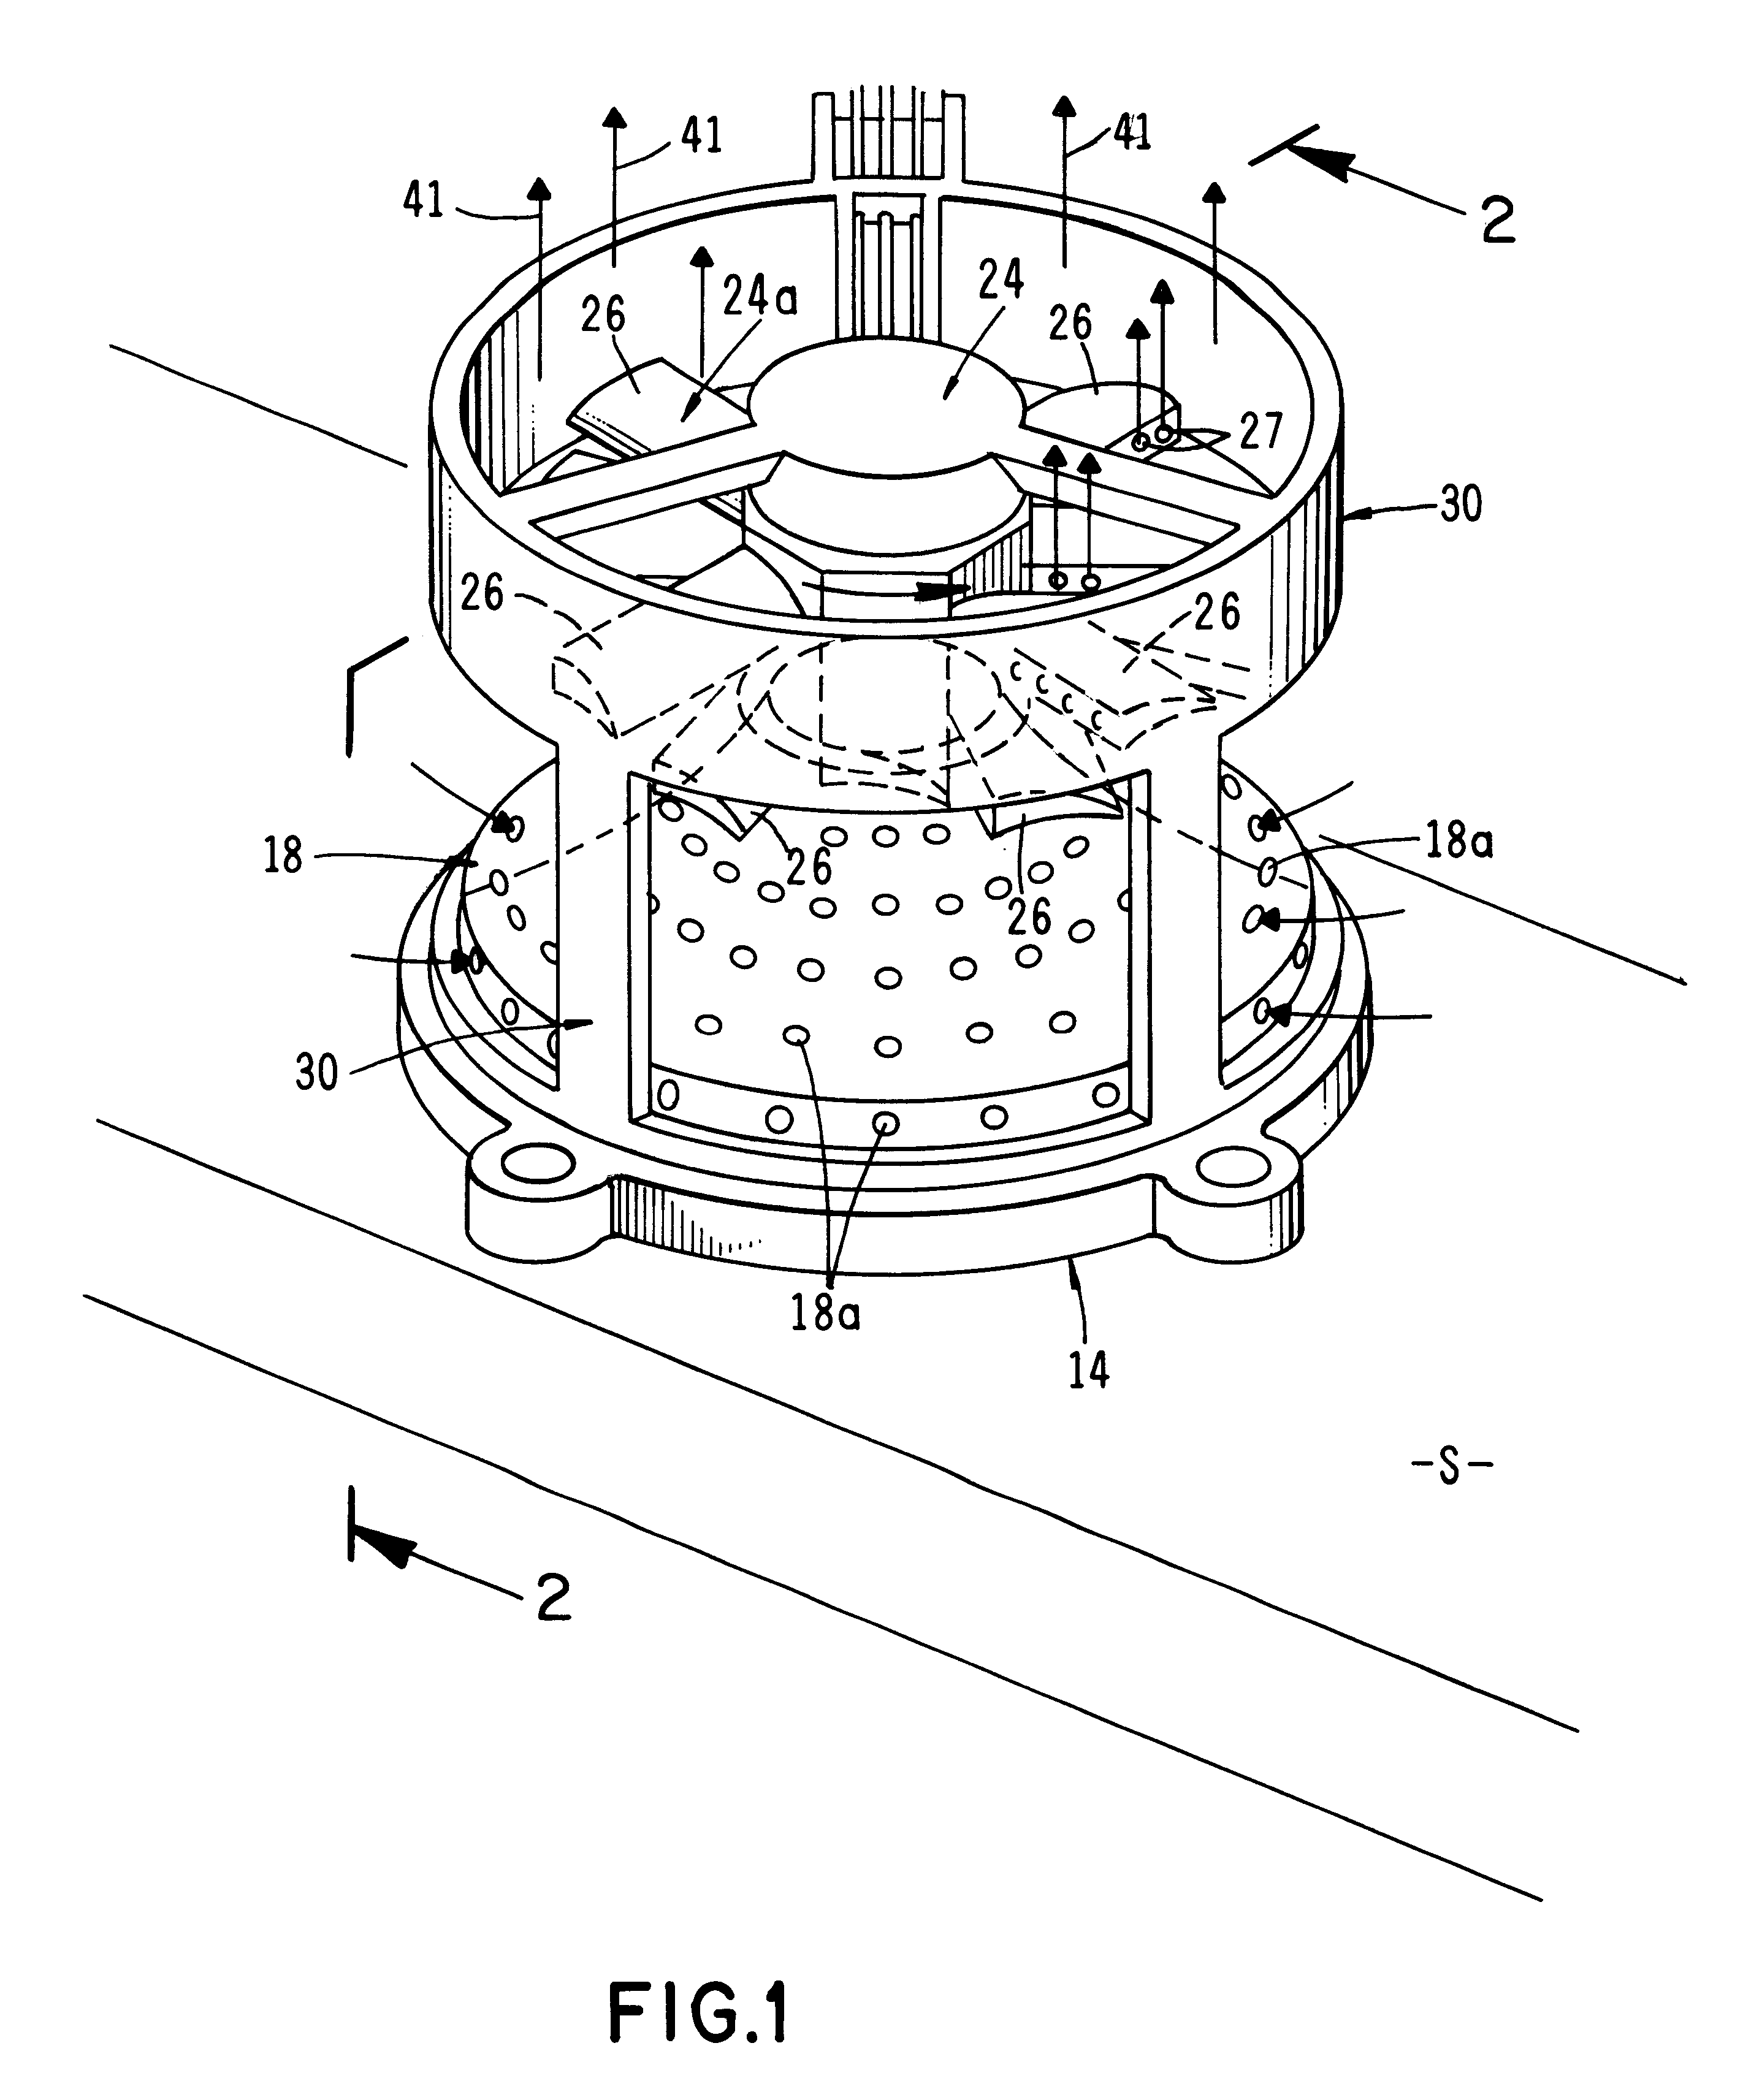 Apparatus for cooling a heat producing member